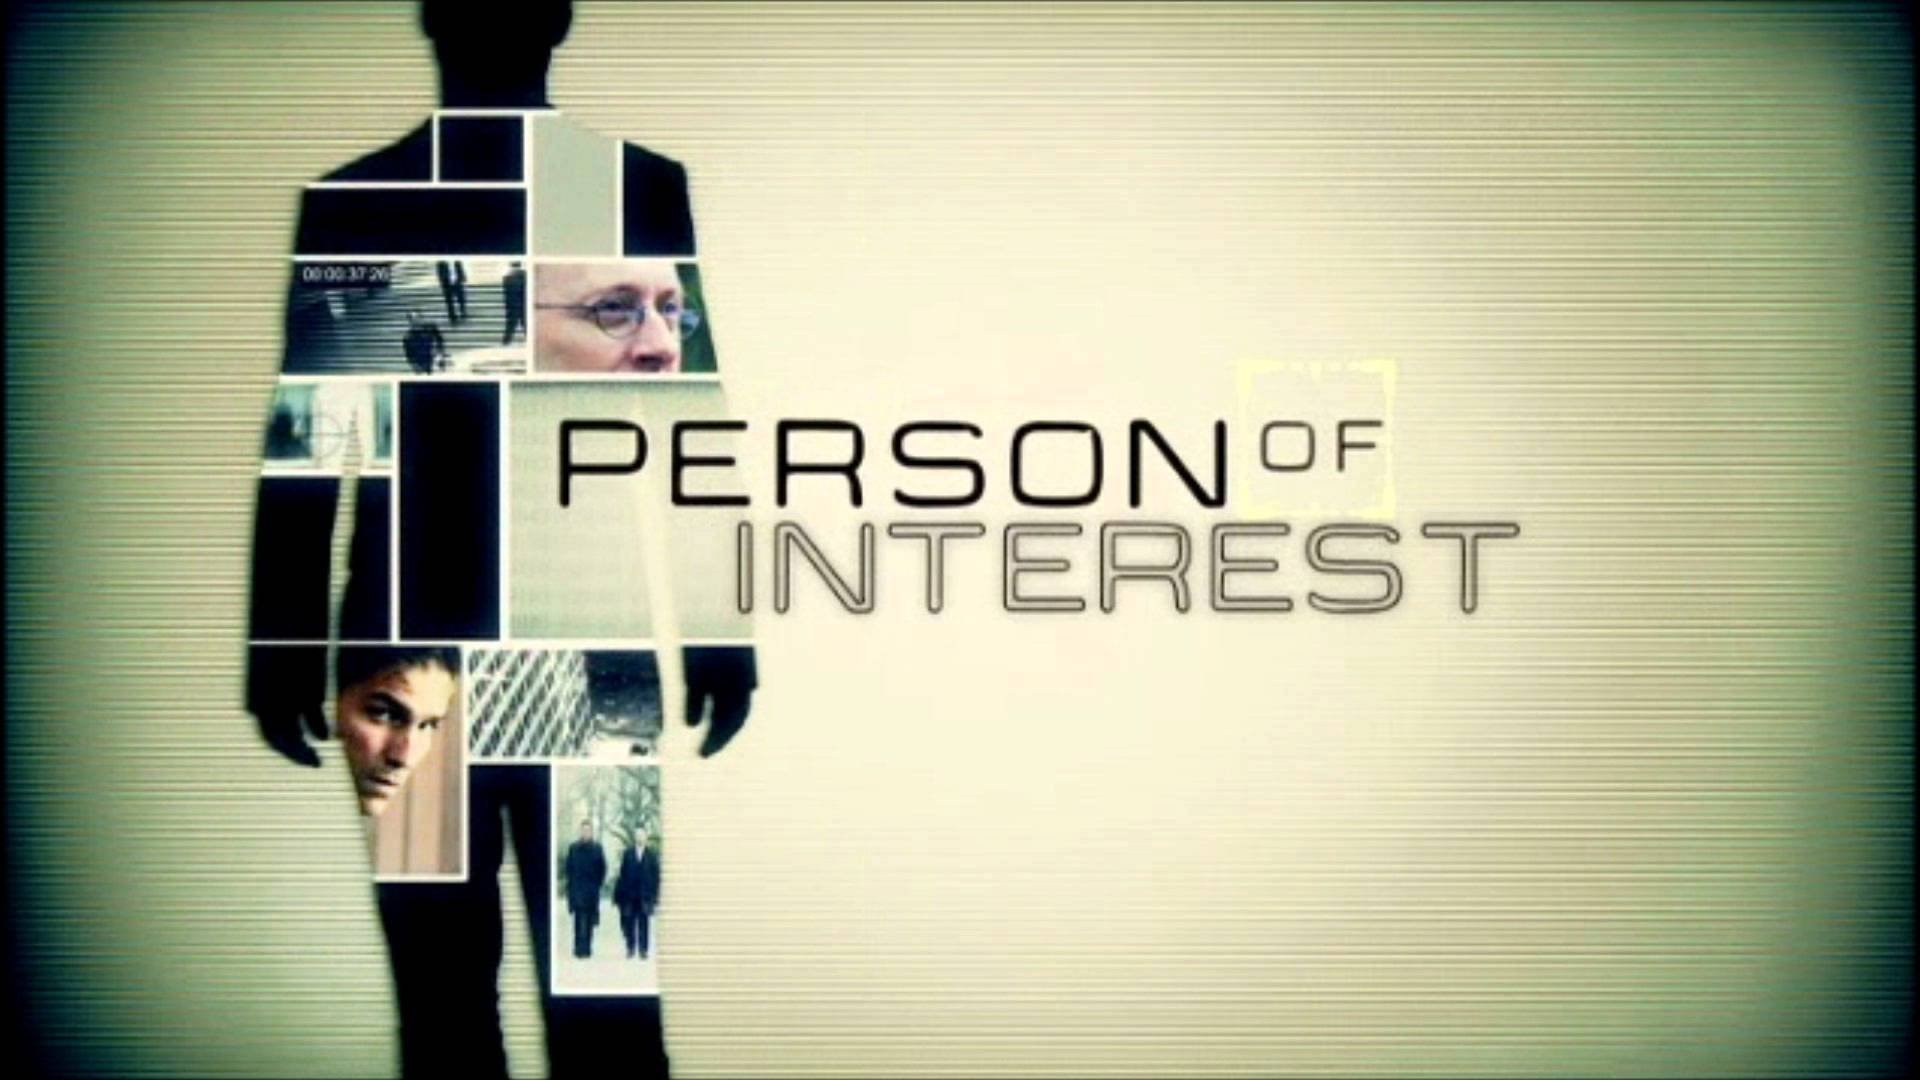 1920x1080 PERSON OF INTEREST action drama mystery series crime wallpaper |   | 476688 | WallpaperUP